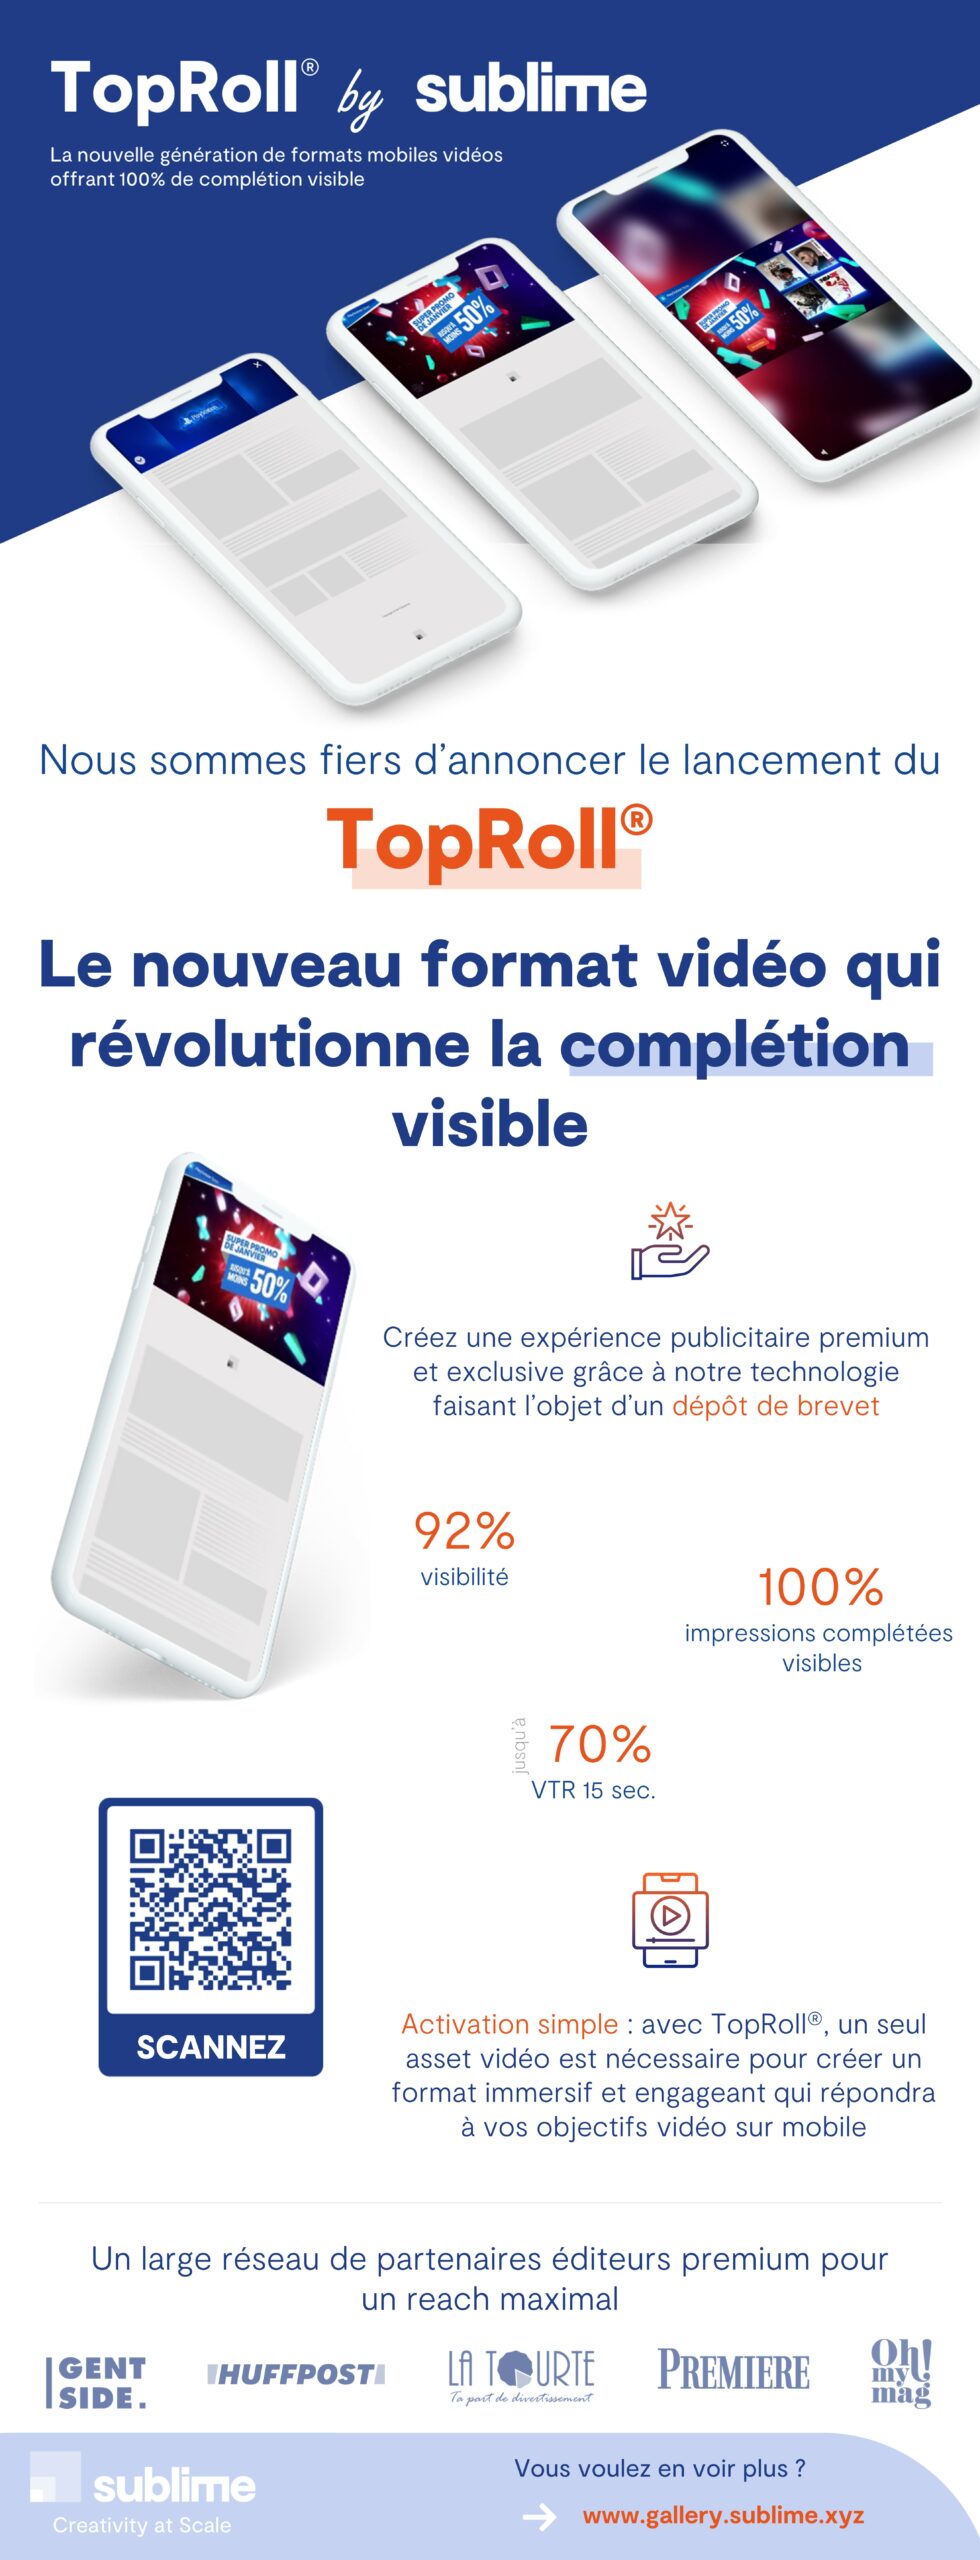 TopRoll launch_Email blast [FR]